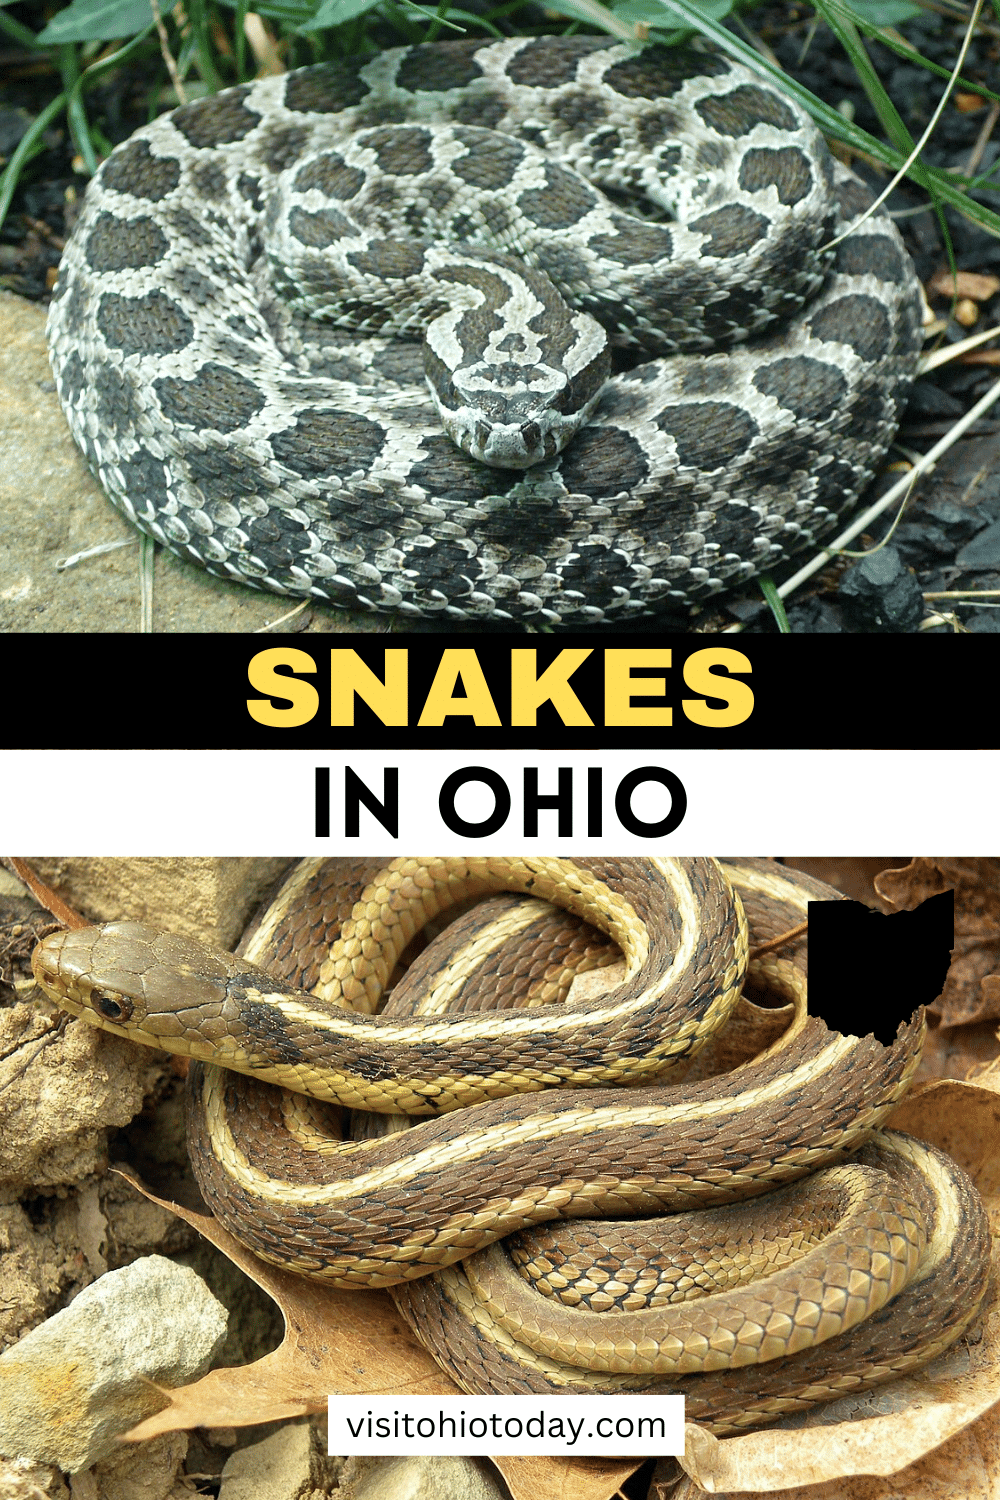 Various types of snakes live in Ohio. In this article, we are featuring 16 Snakes that can be found in the state, and each species has its specific behaviors.